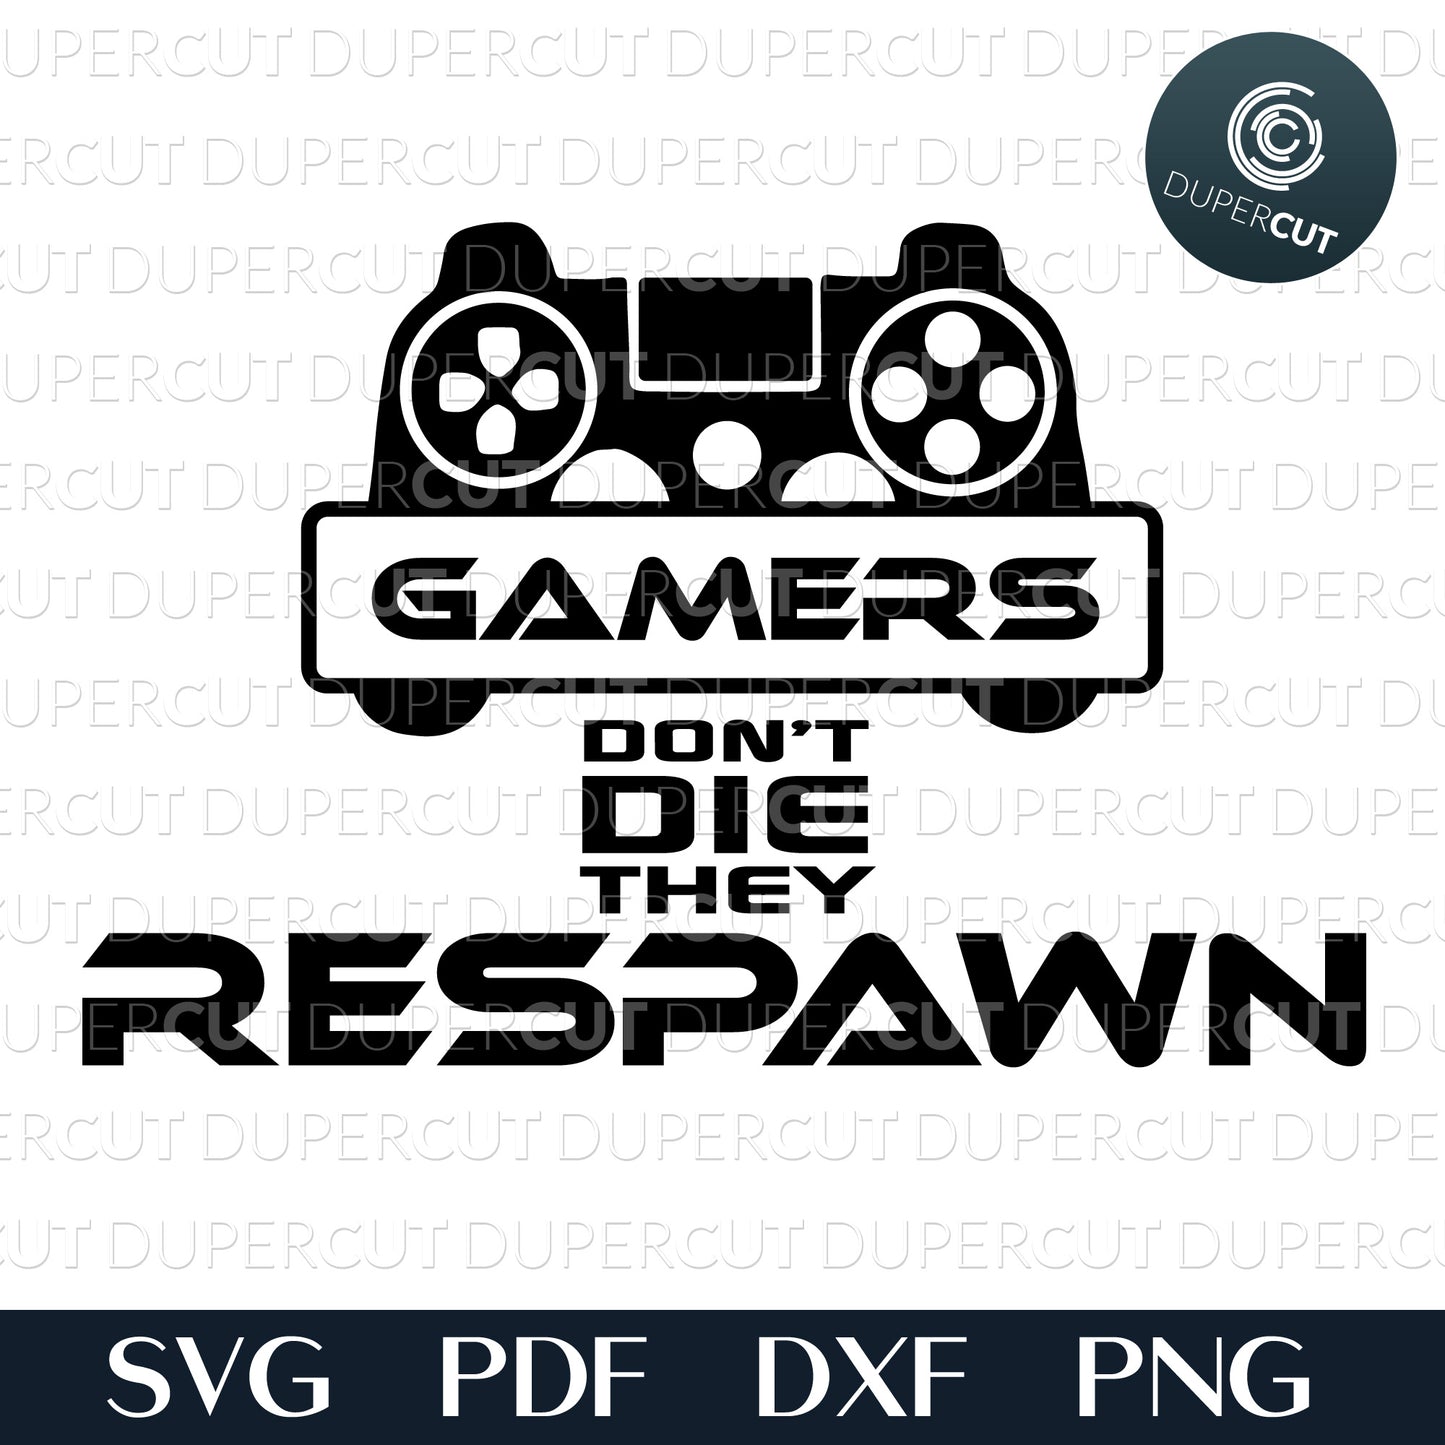 Gamers don't die, they respawn - DIY sign - SVG DXF JPEG files for CNC machines, laser cutting, Cricut, Silhouette Cameo, Glowforge engraving